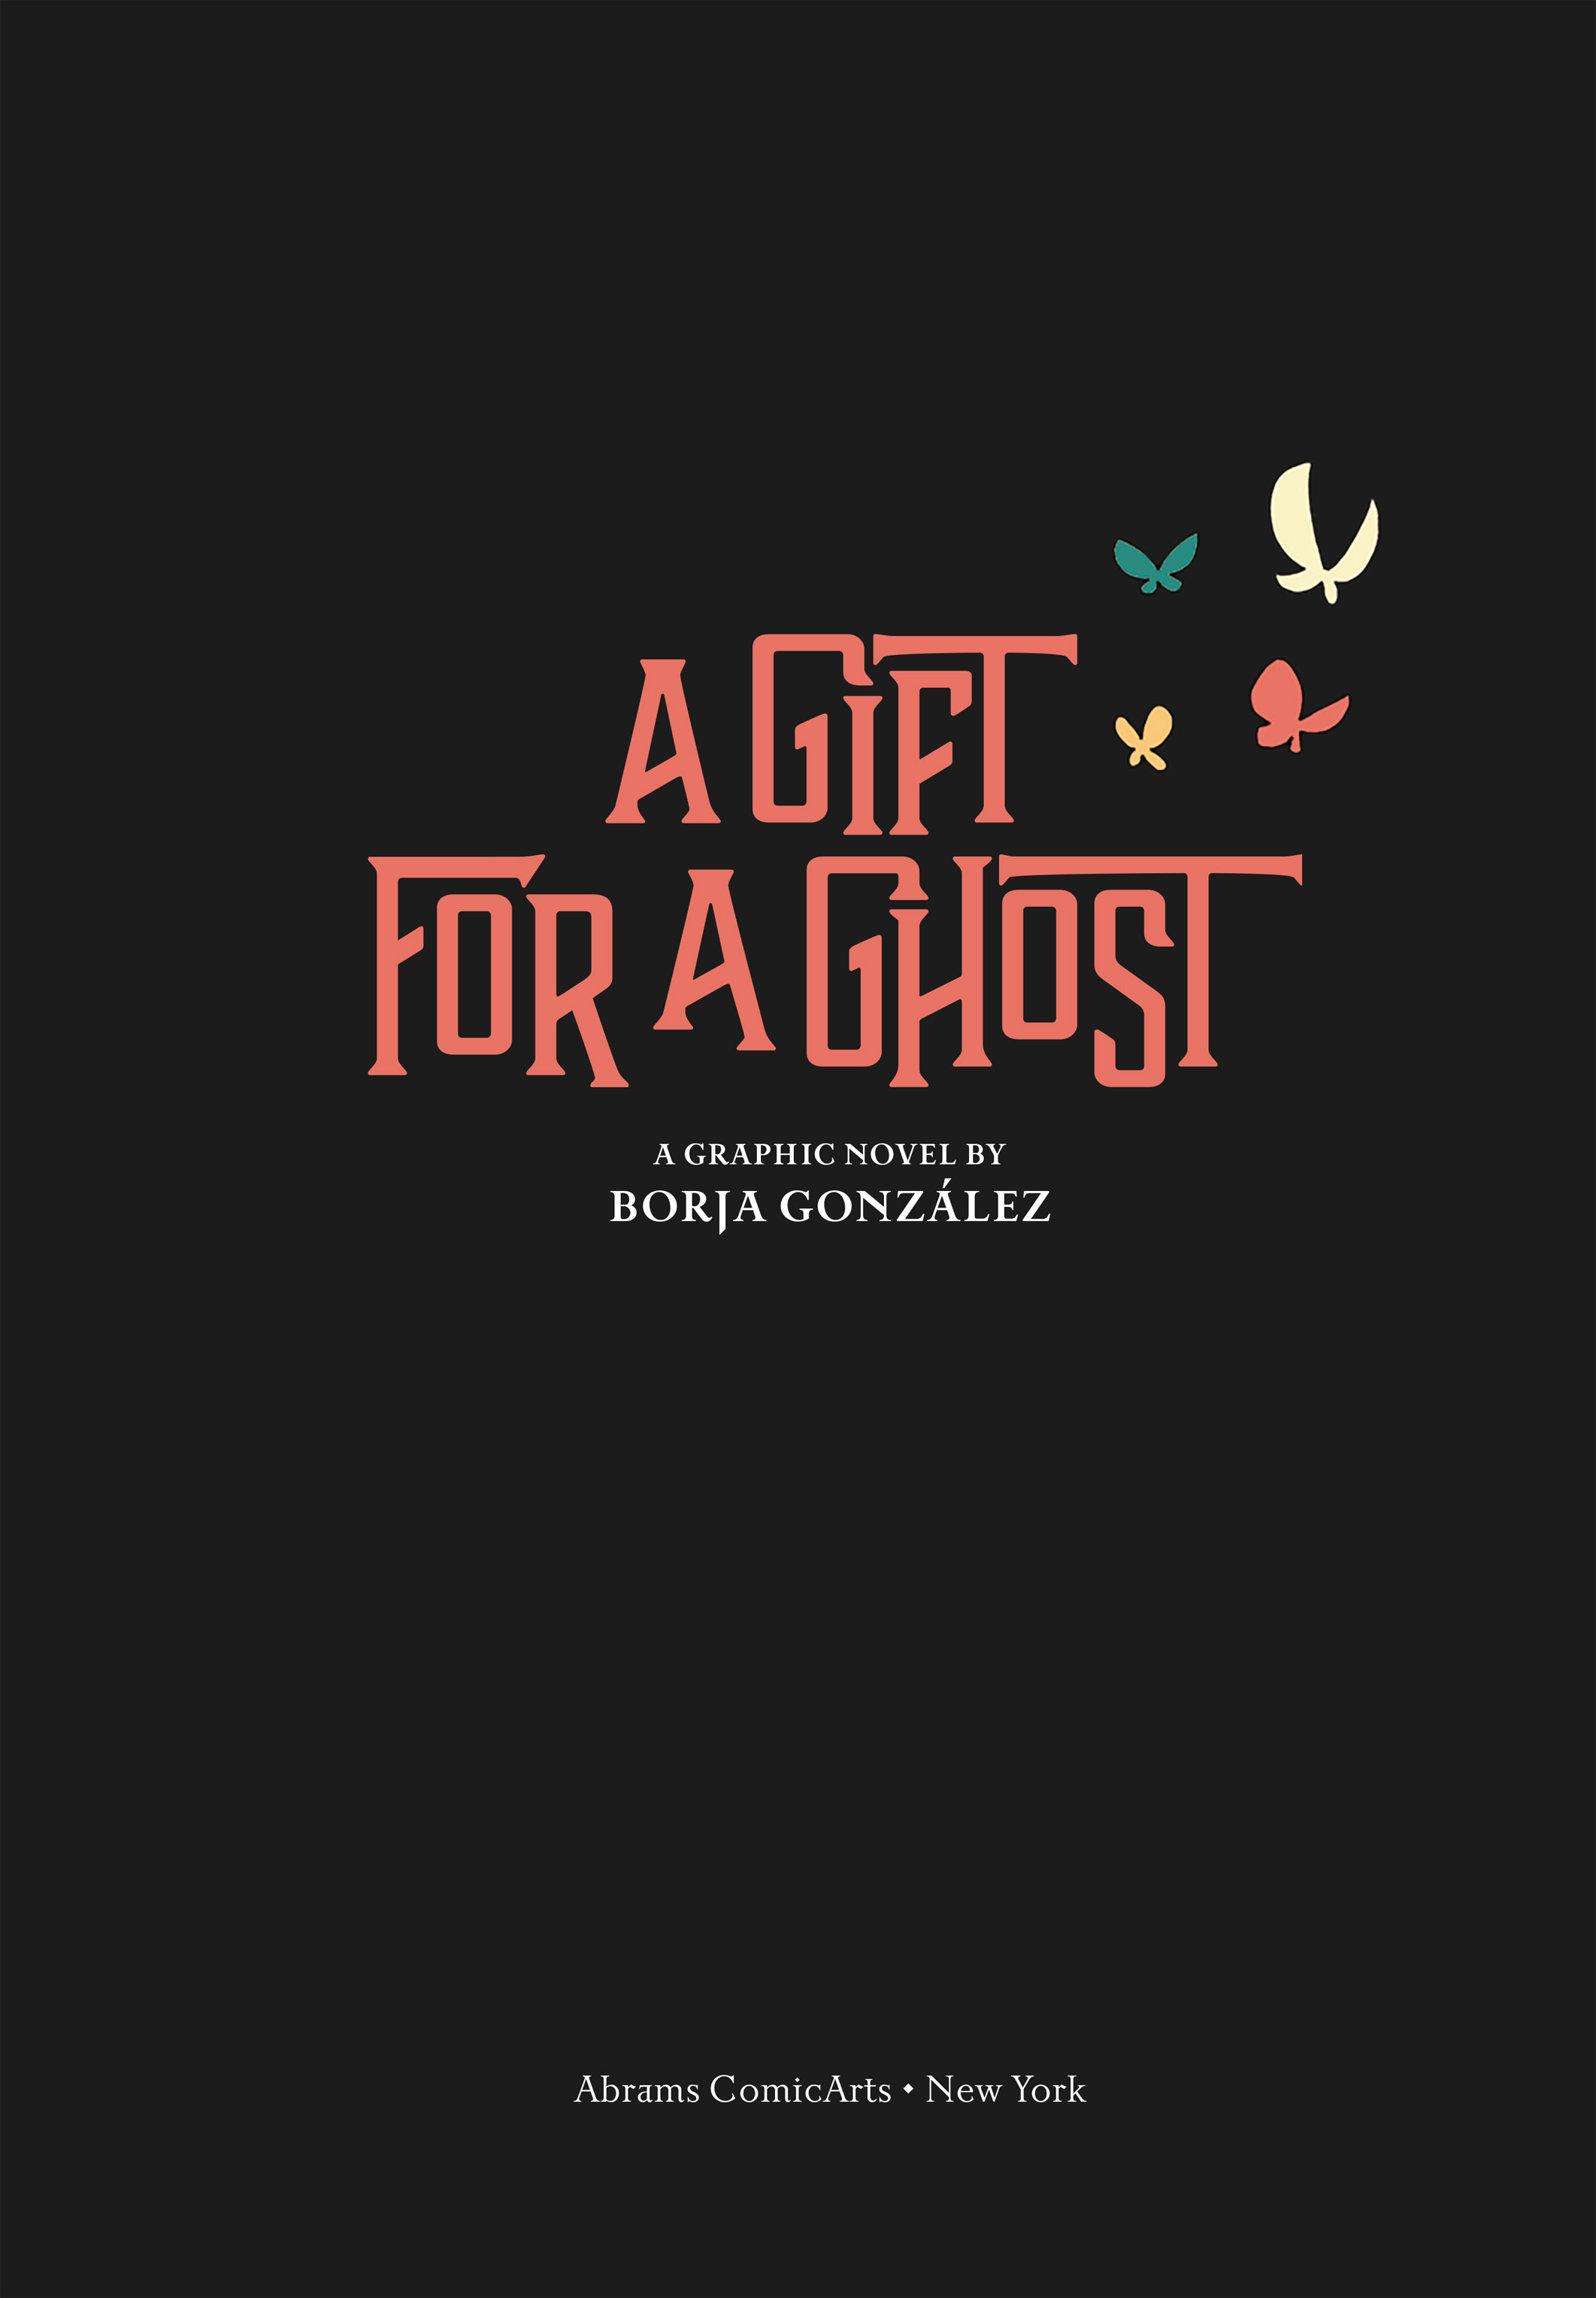 Read online A Gift for a Ghost comic -  Issue # TPB - 6